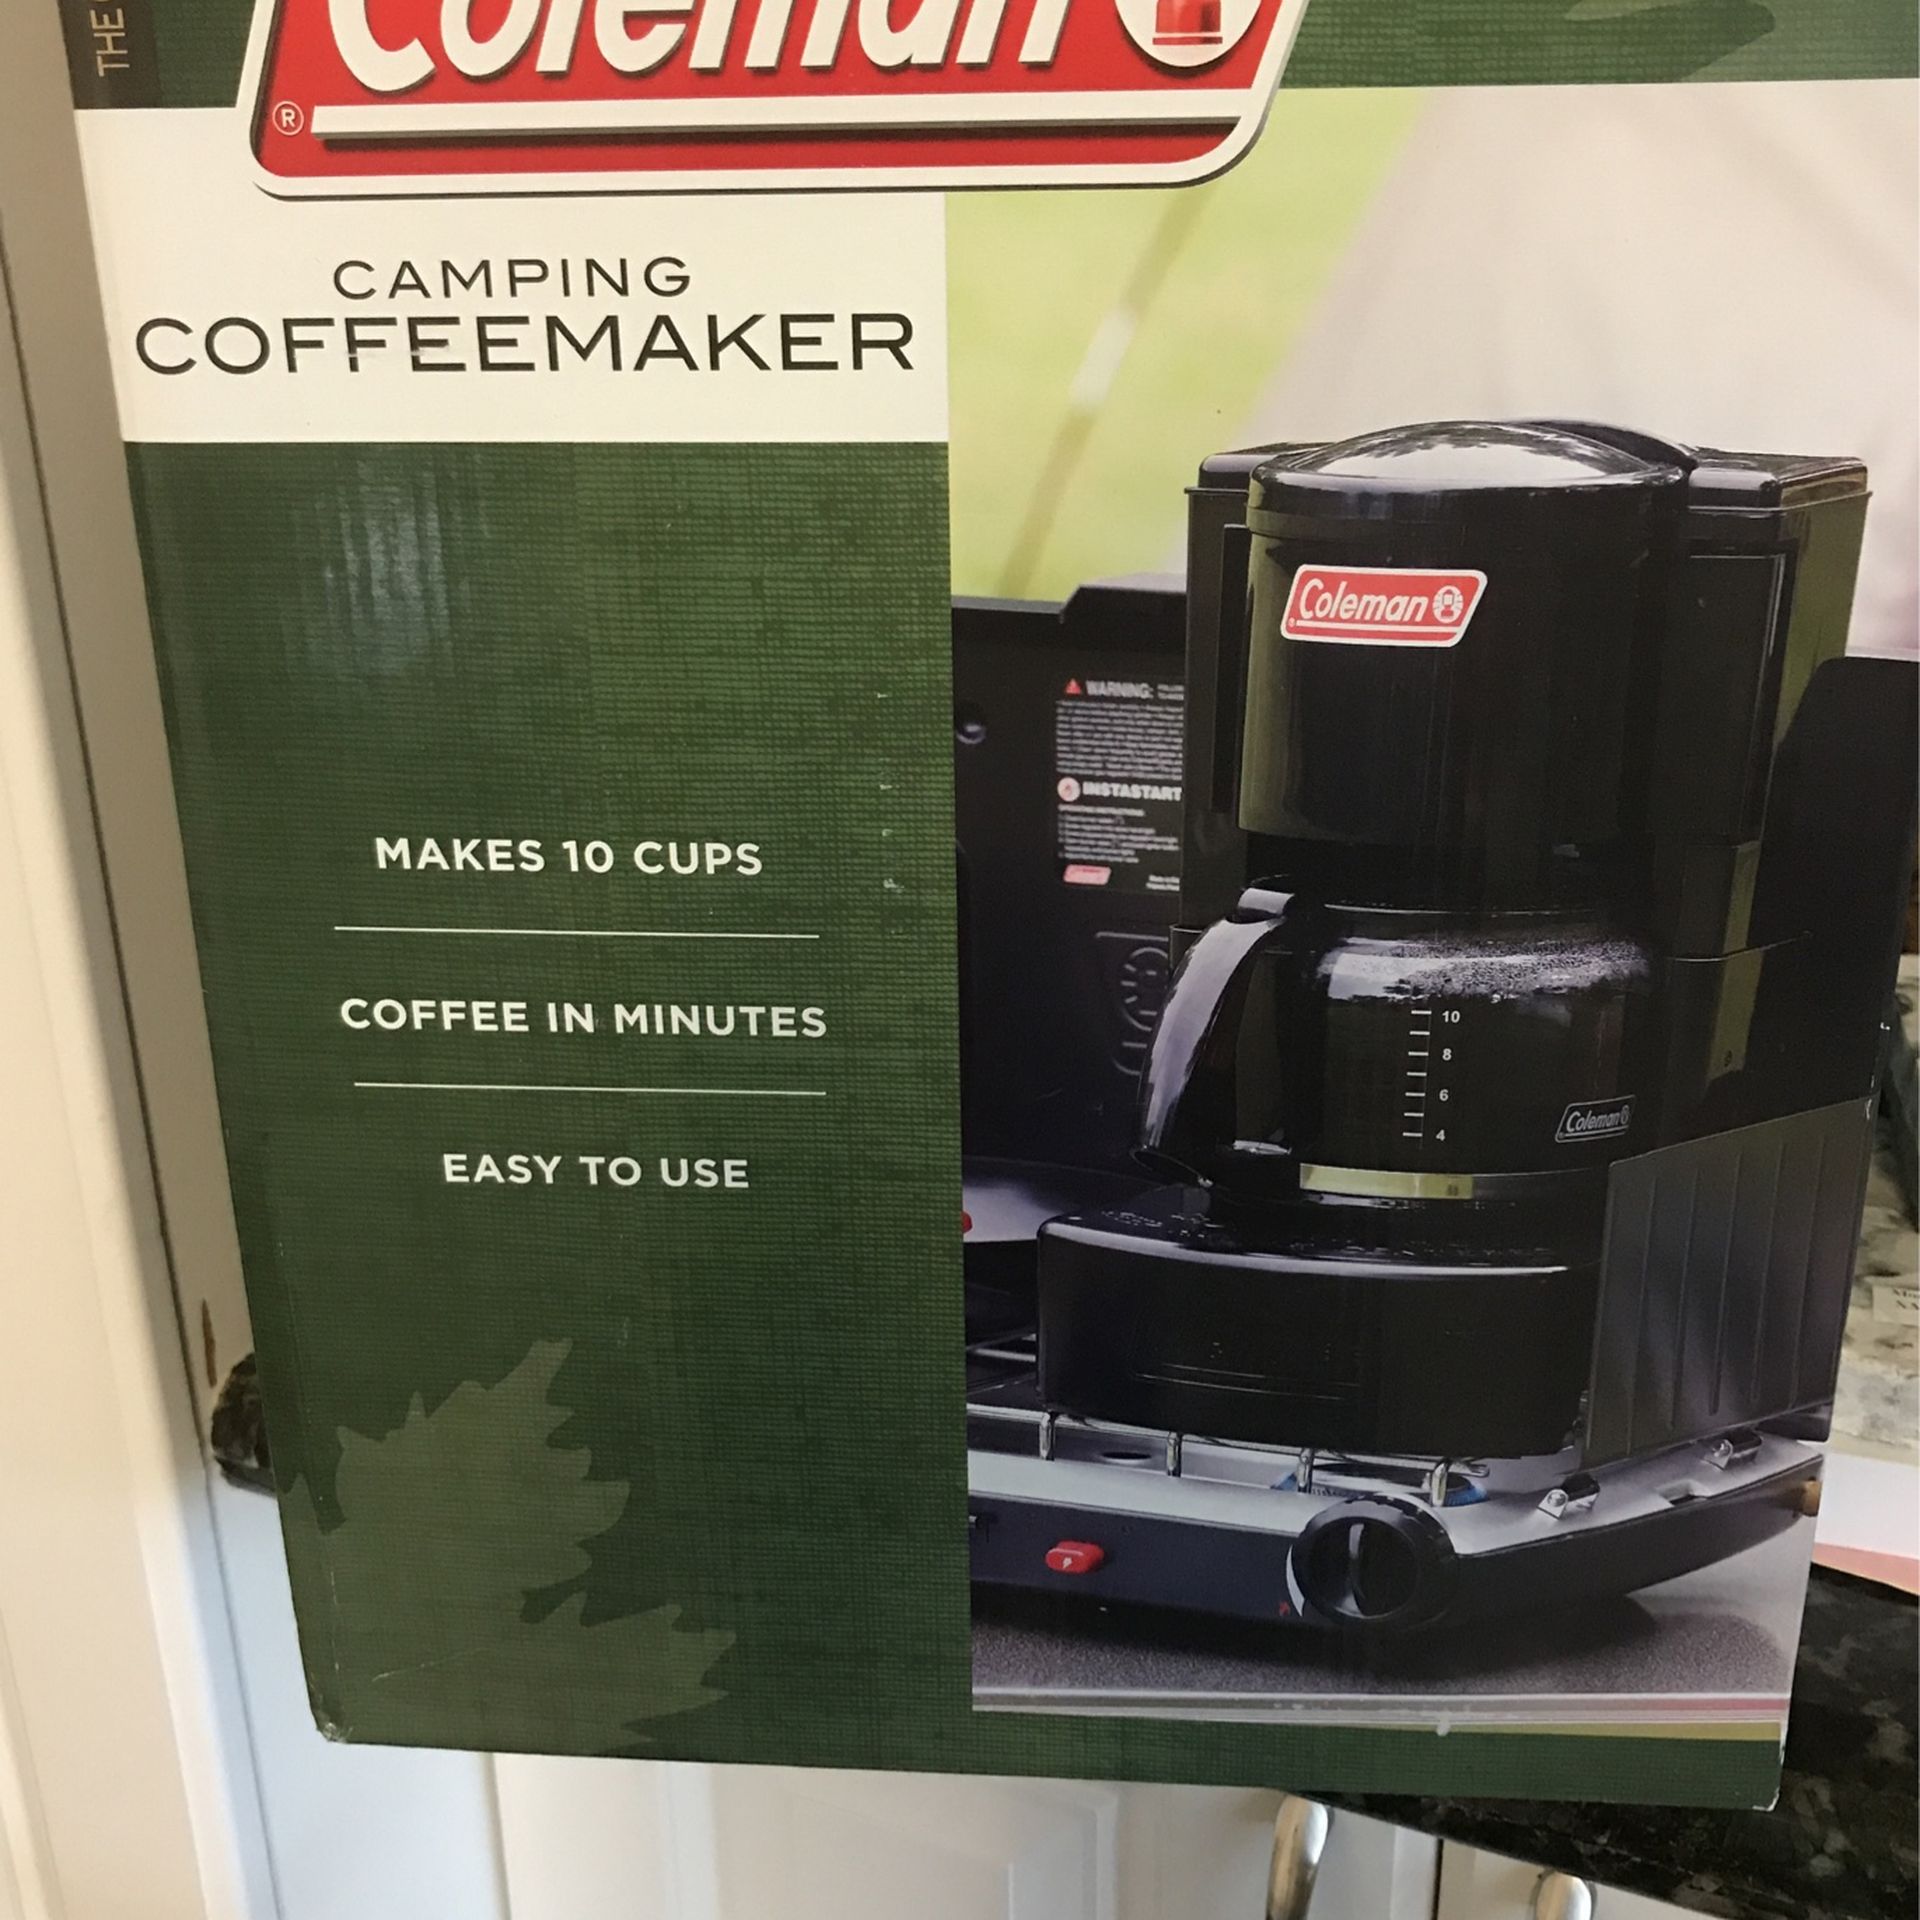 Coleman 10 Cup Camping Coffee Maker for Sale in Modesto, CA - OfferUp